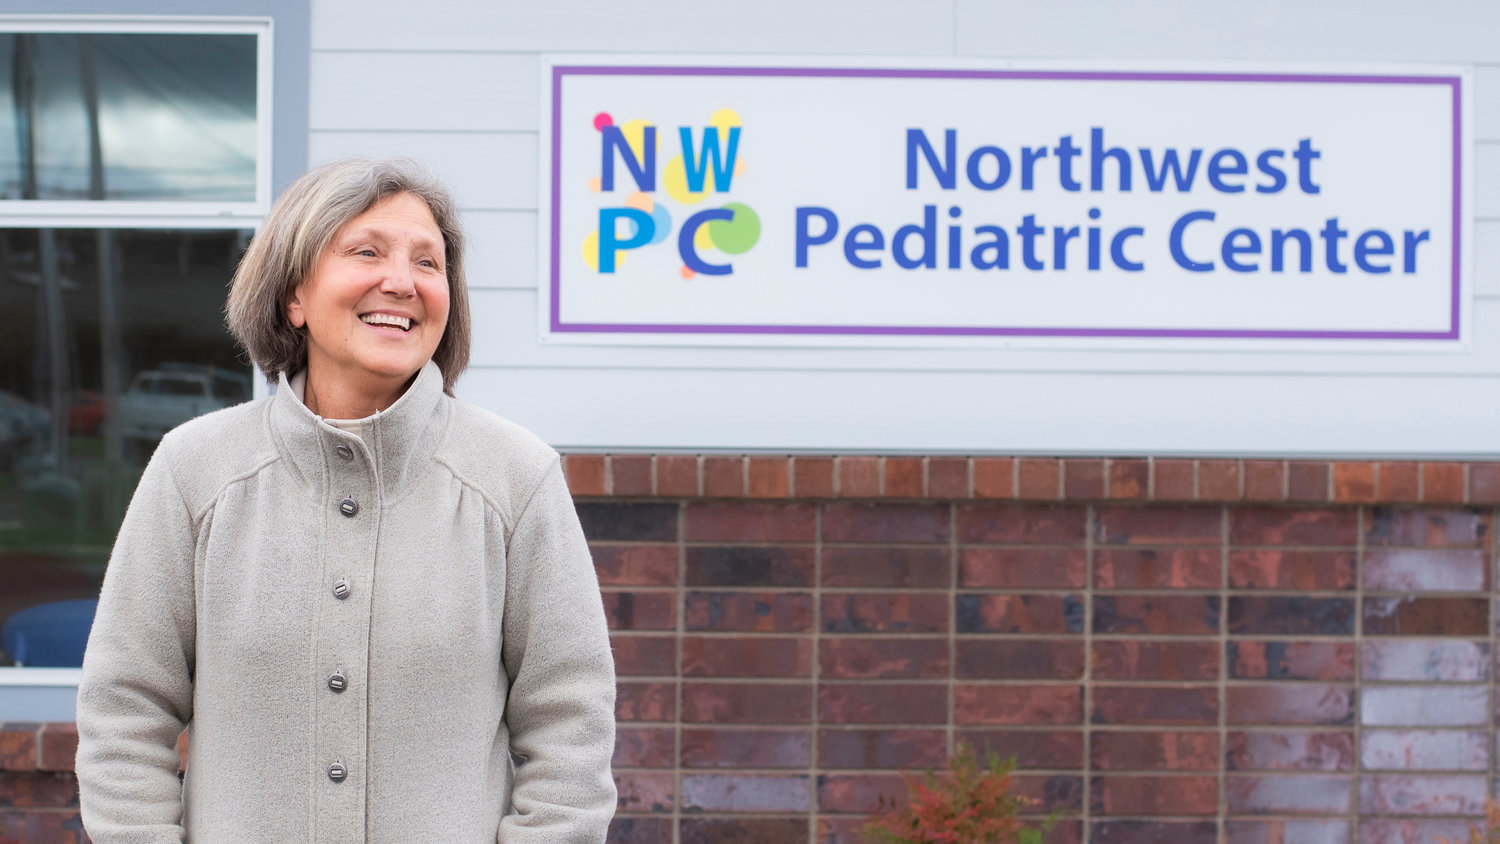 Medical Director Dr. Jennifer Polley smiles while talking about the new banner on display outside the Northwest Pediatric Center in Centralia.